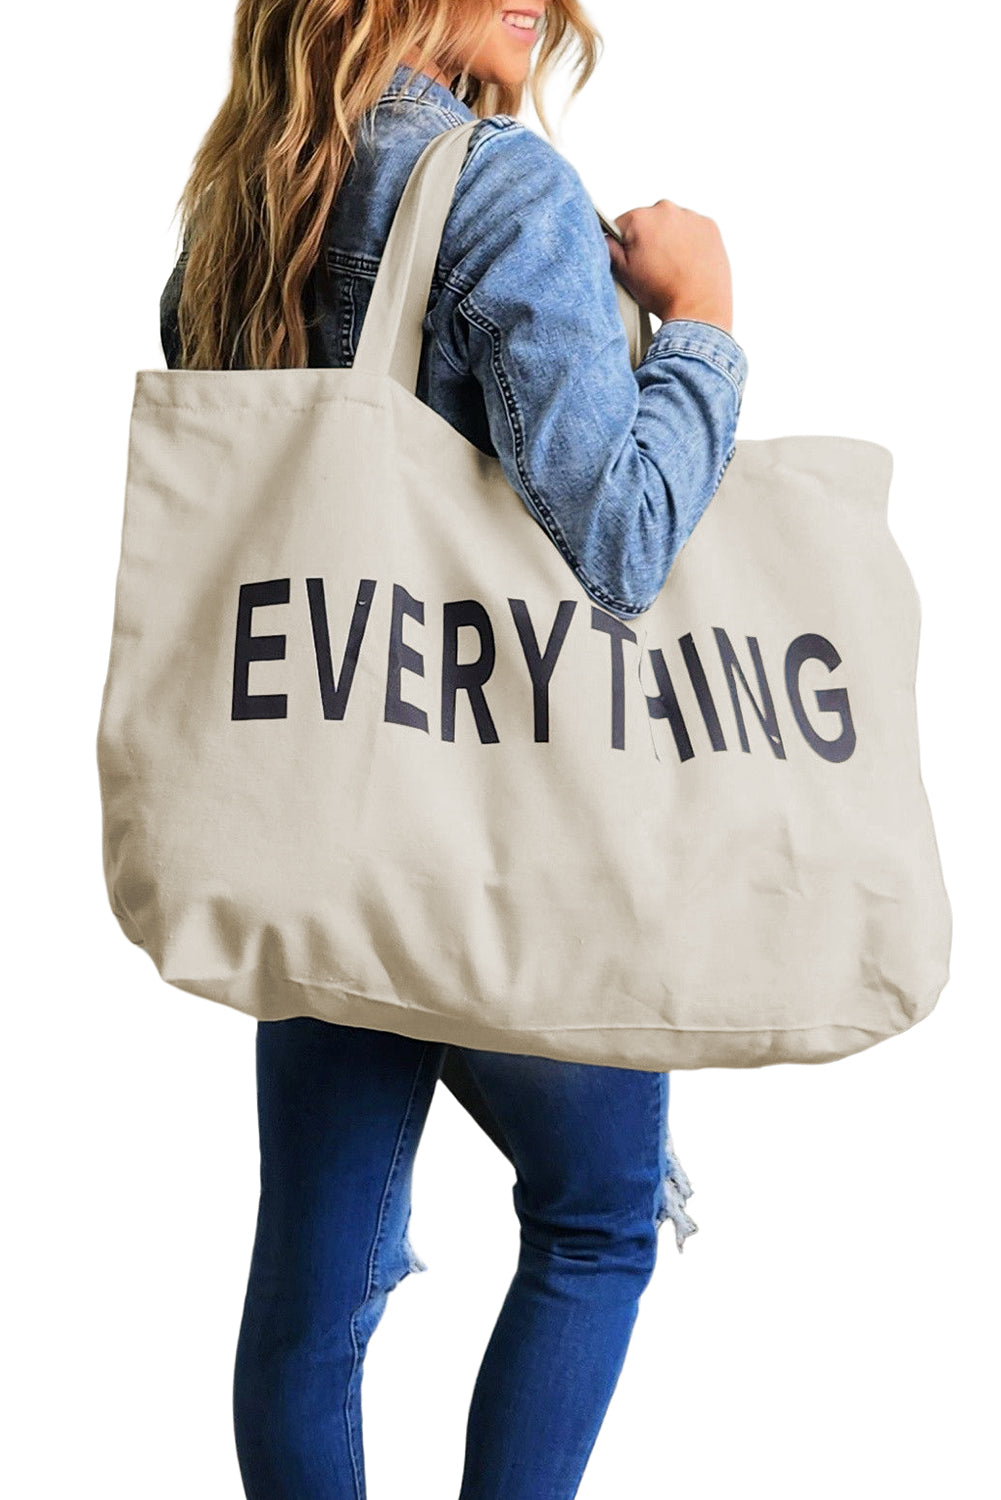 EVERYTHING Letter Print Large Canvas Tote Bag